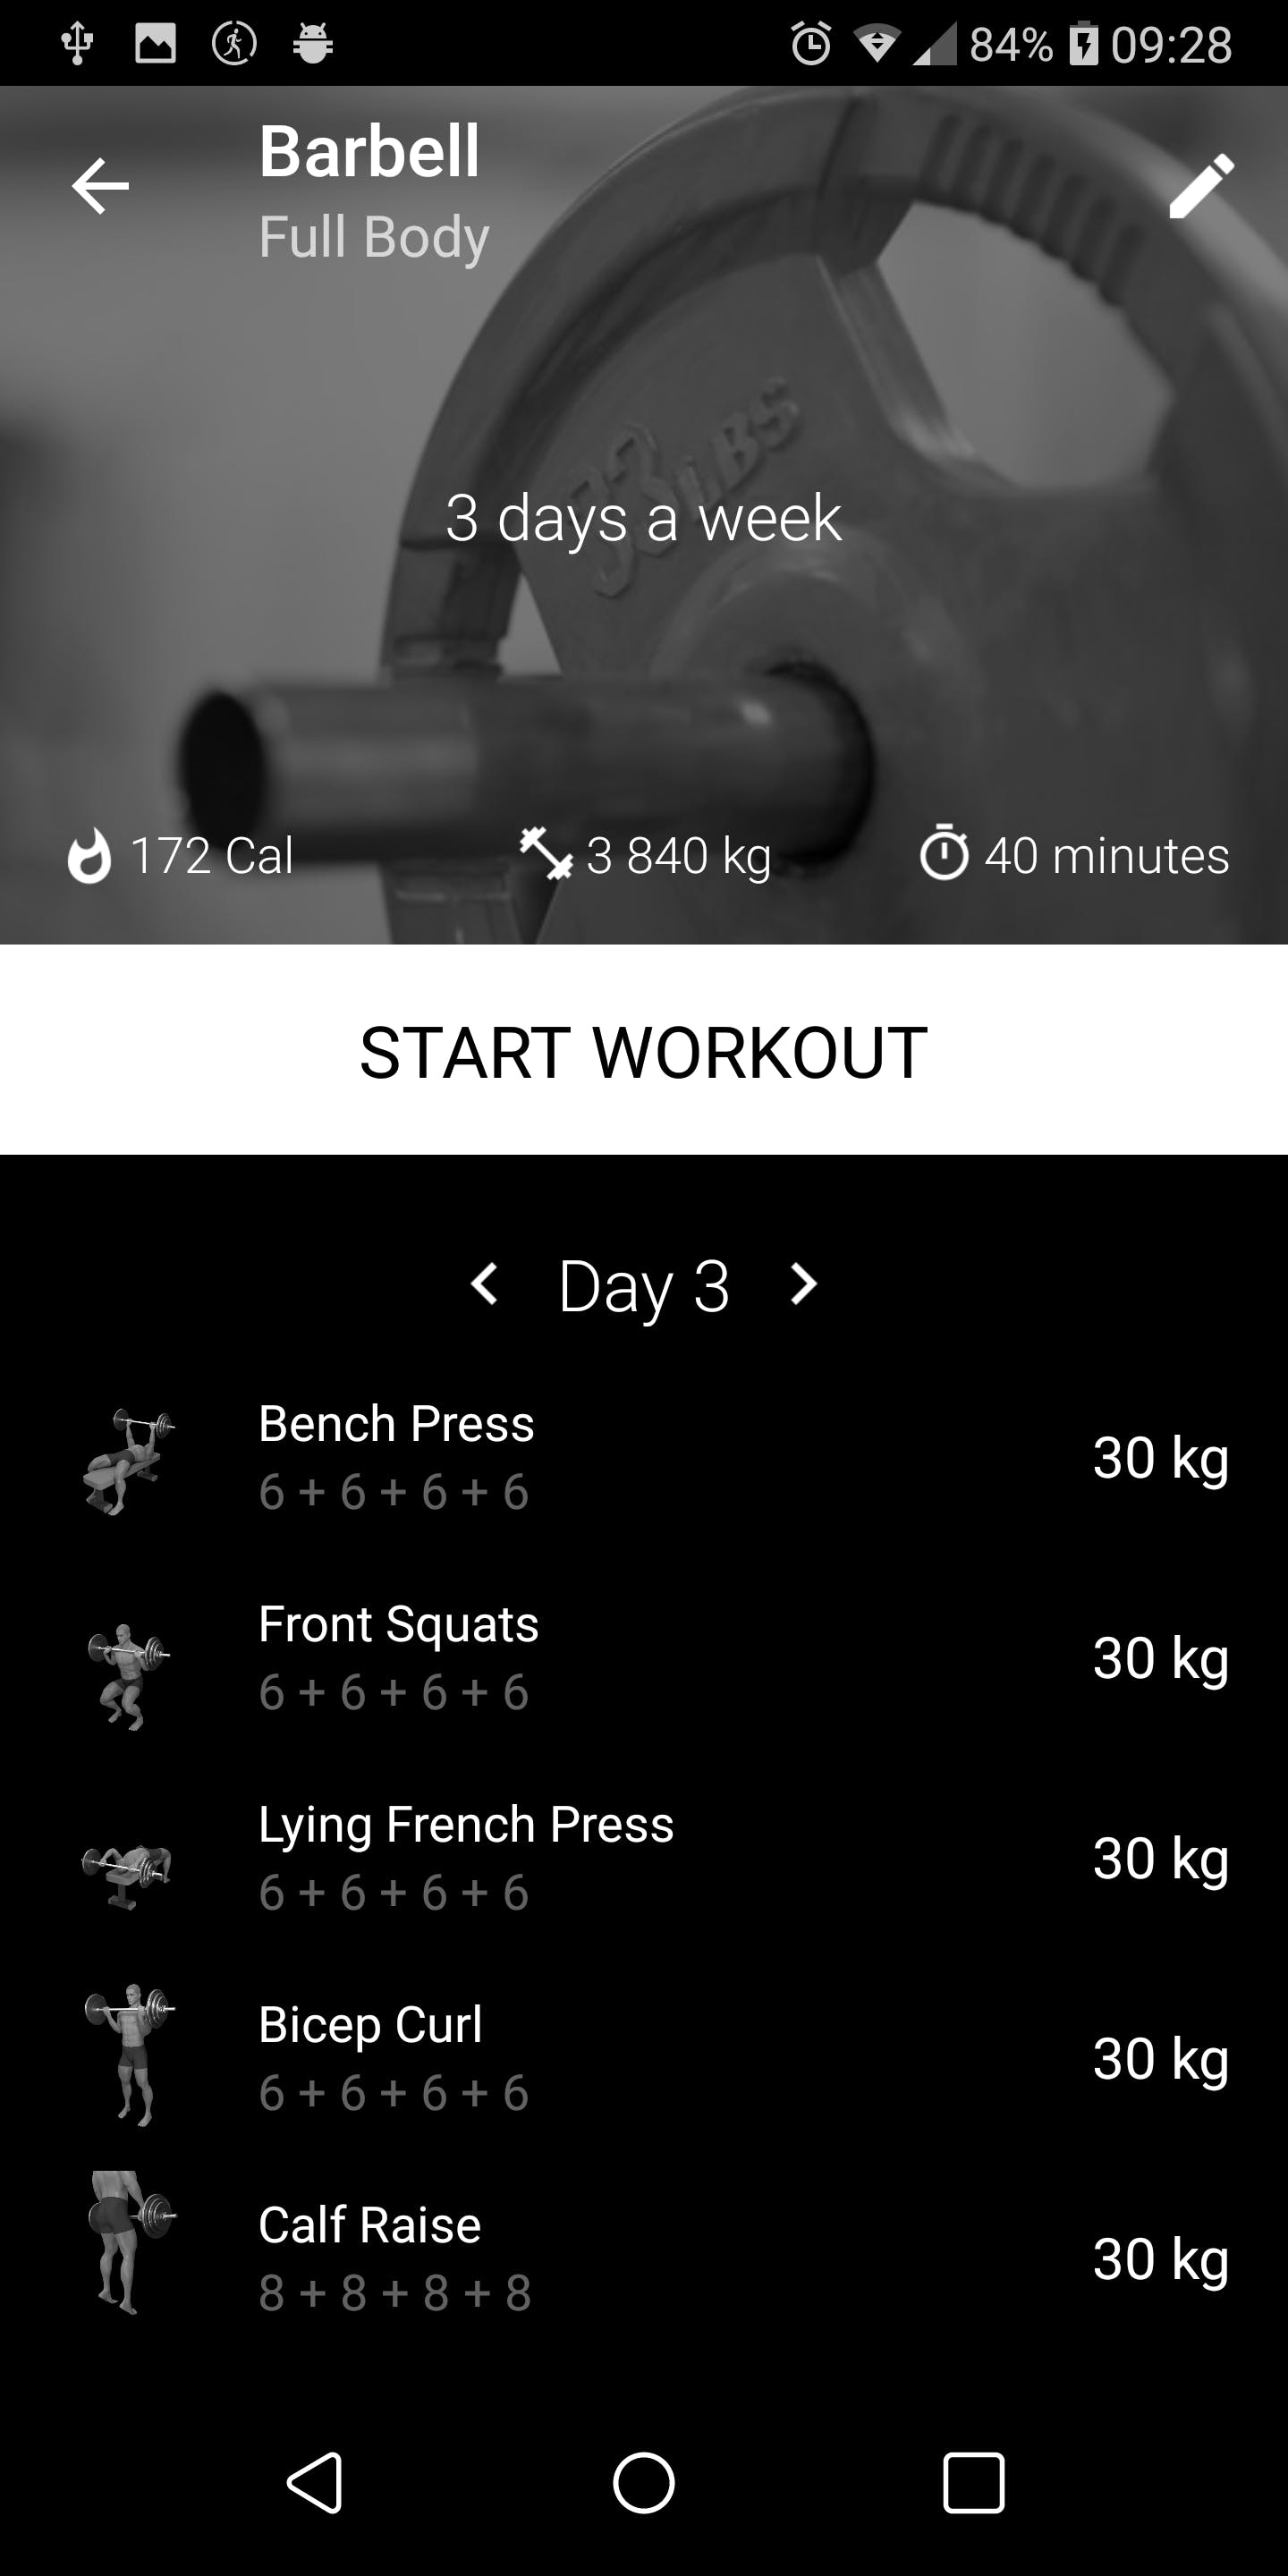 Barbell Home Workout media 1